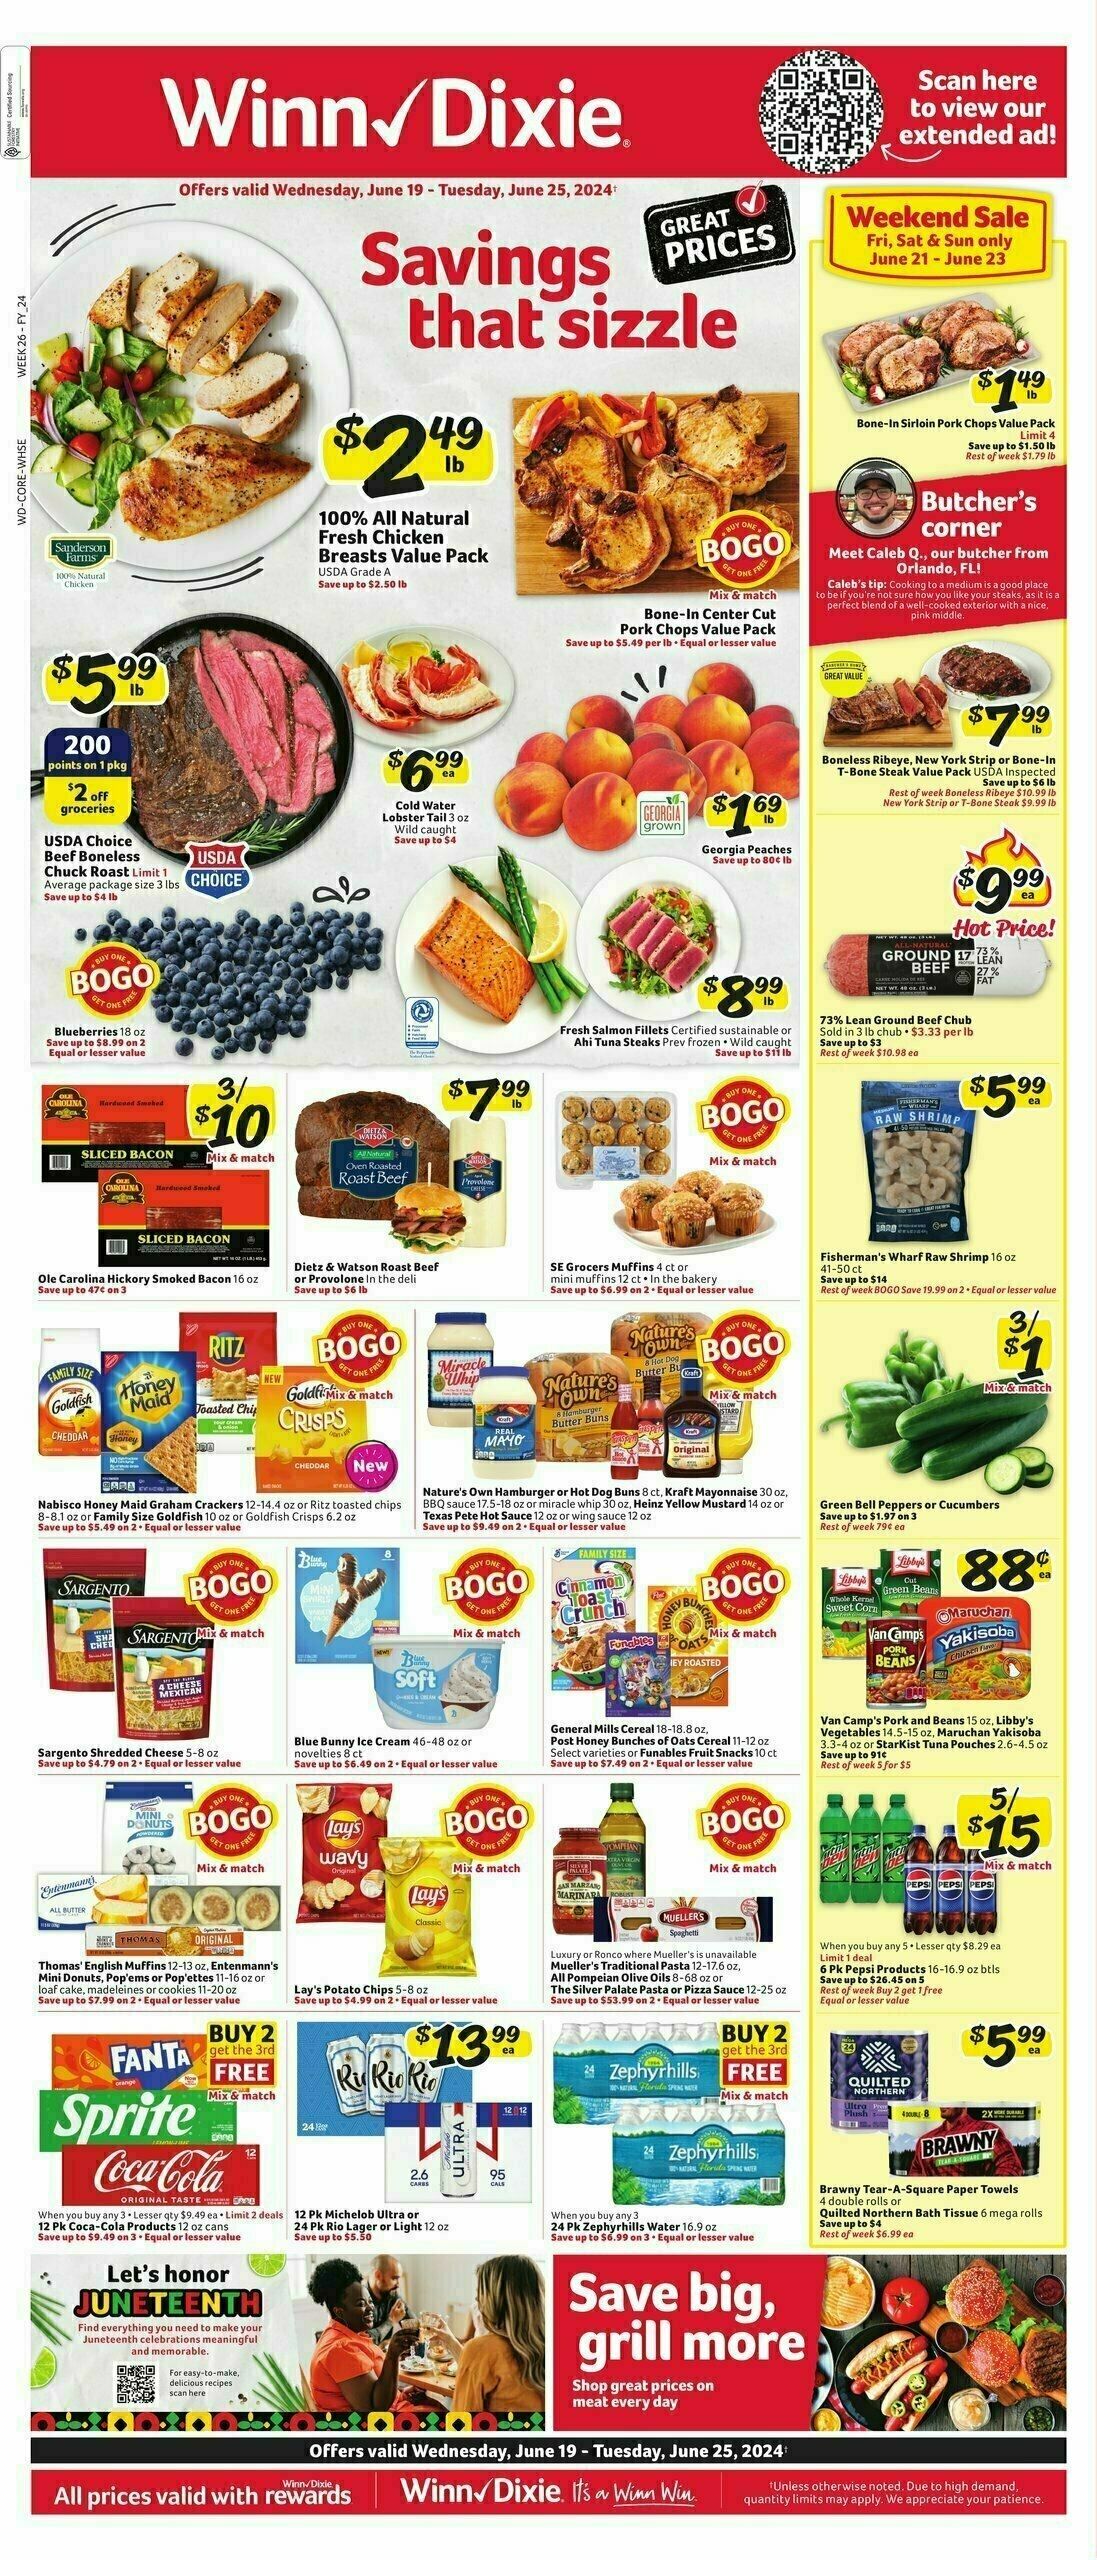 Winn-Dixie Weekly Ad from June 19